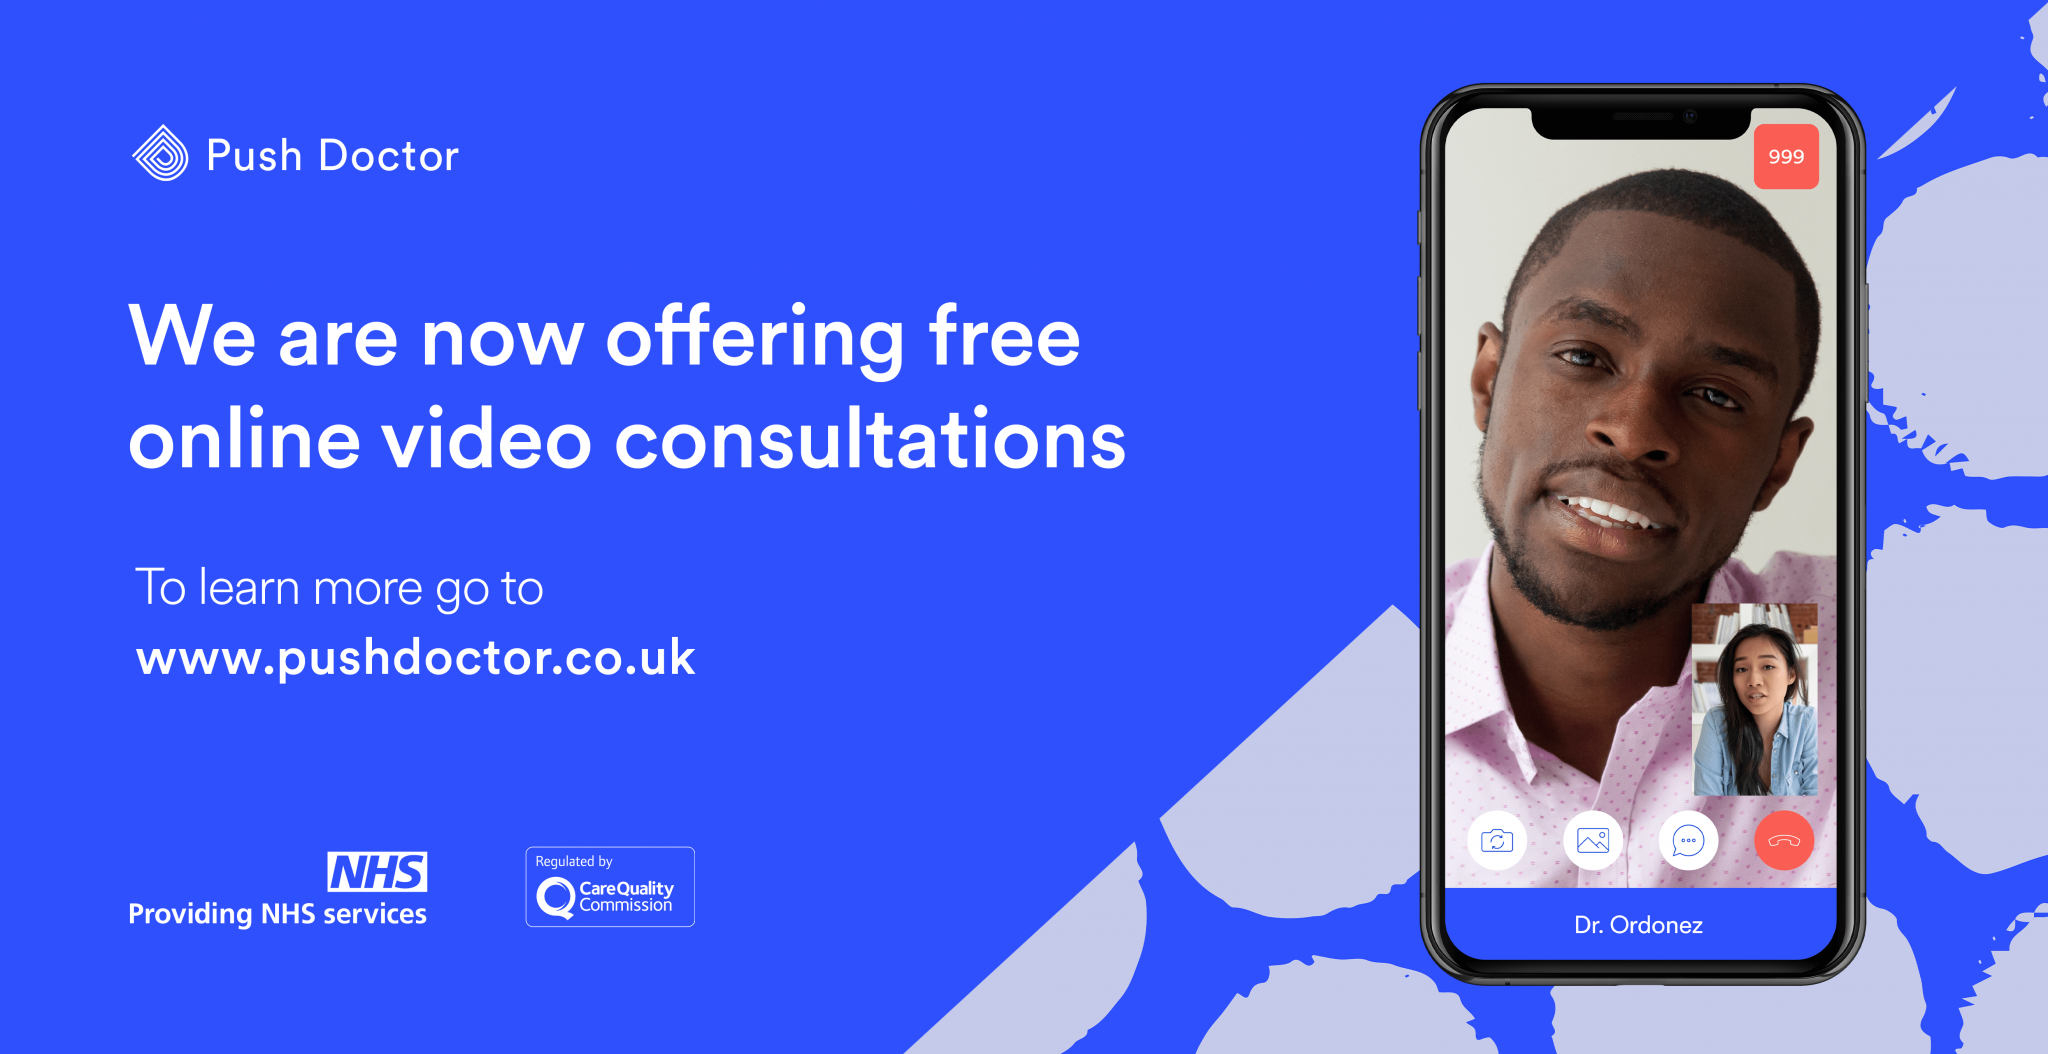 We are now offering free online video consultations